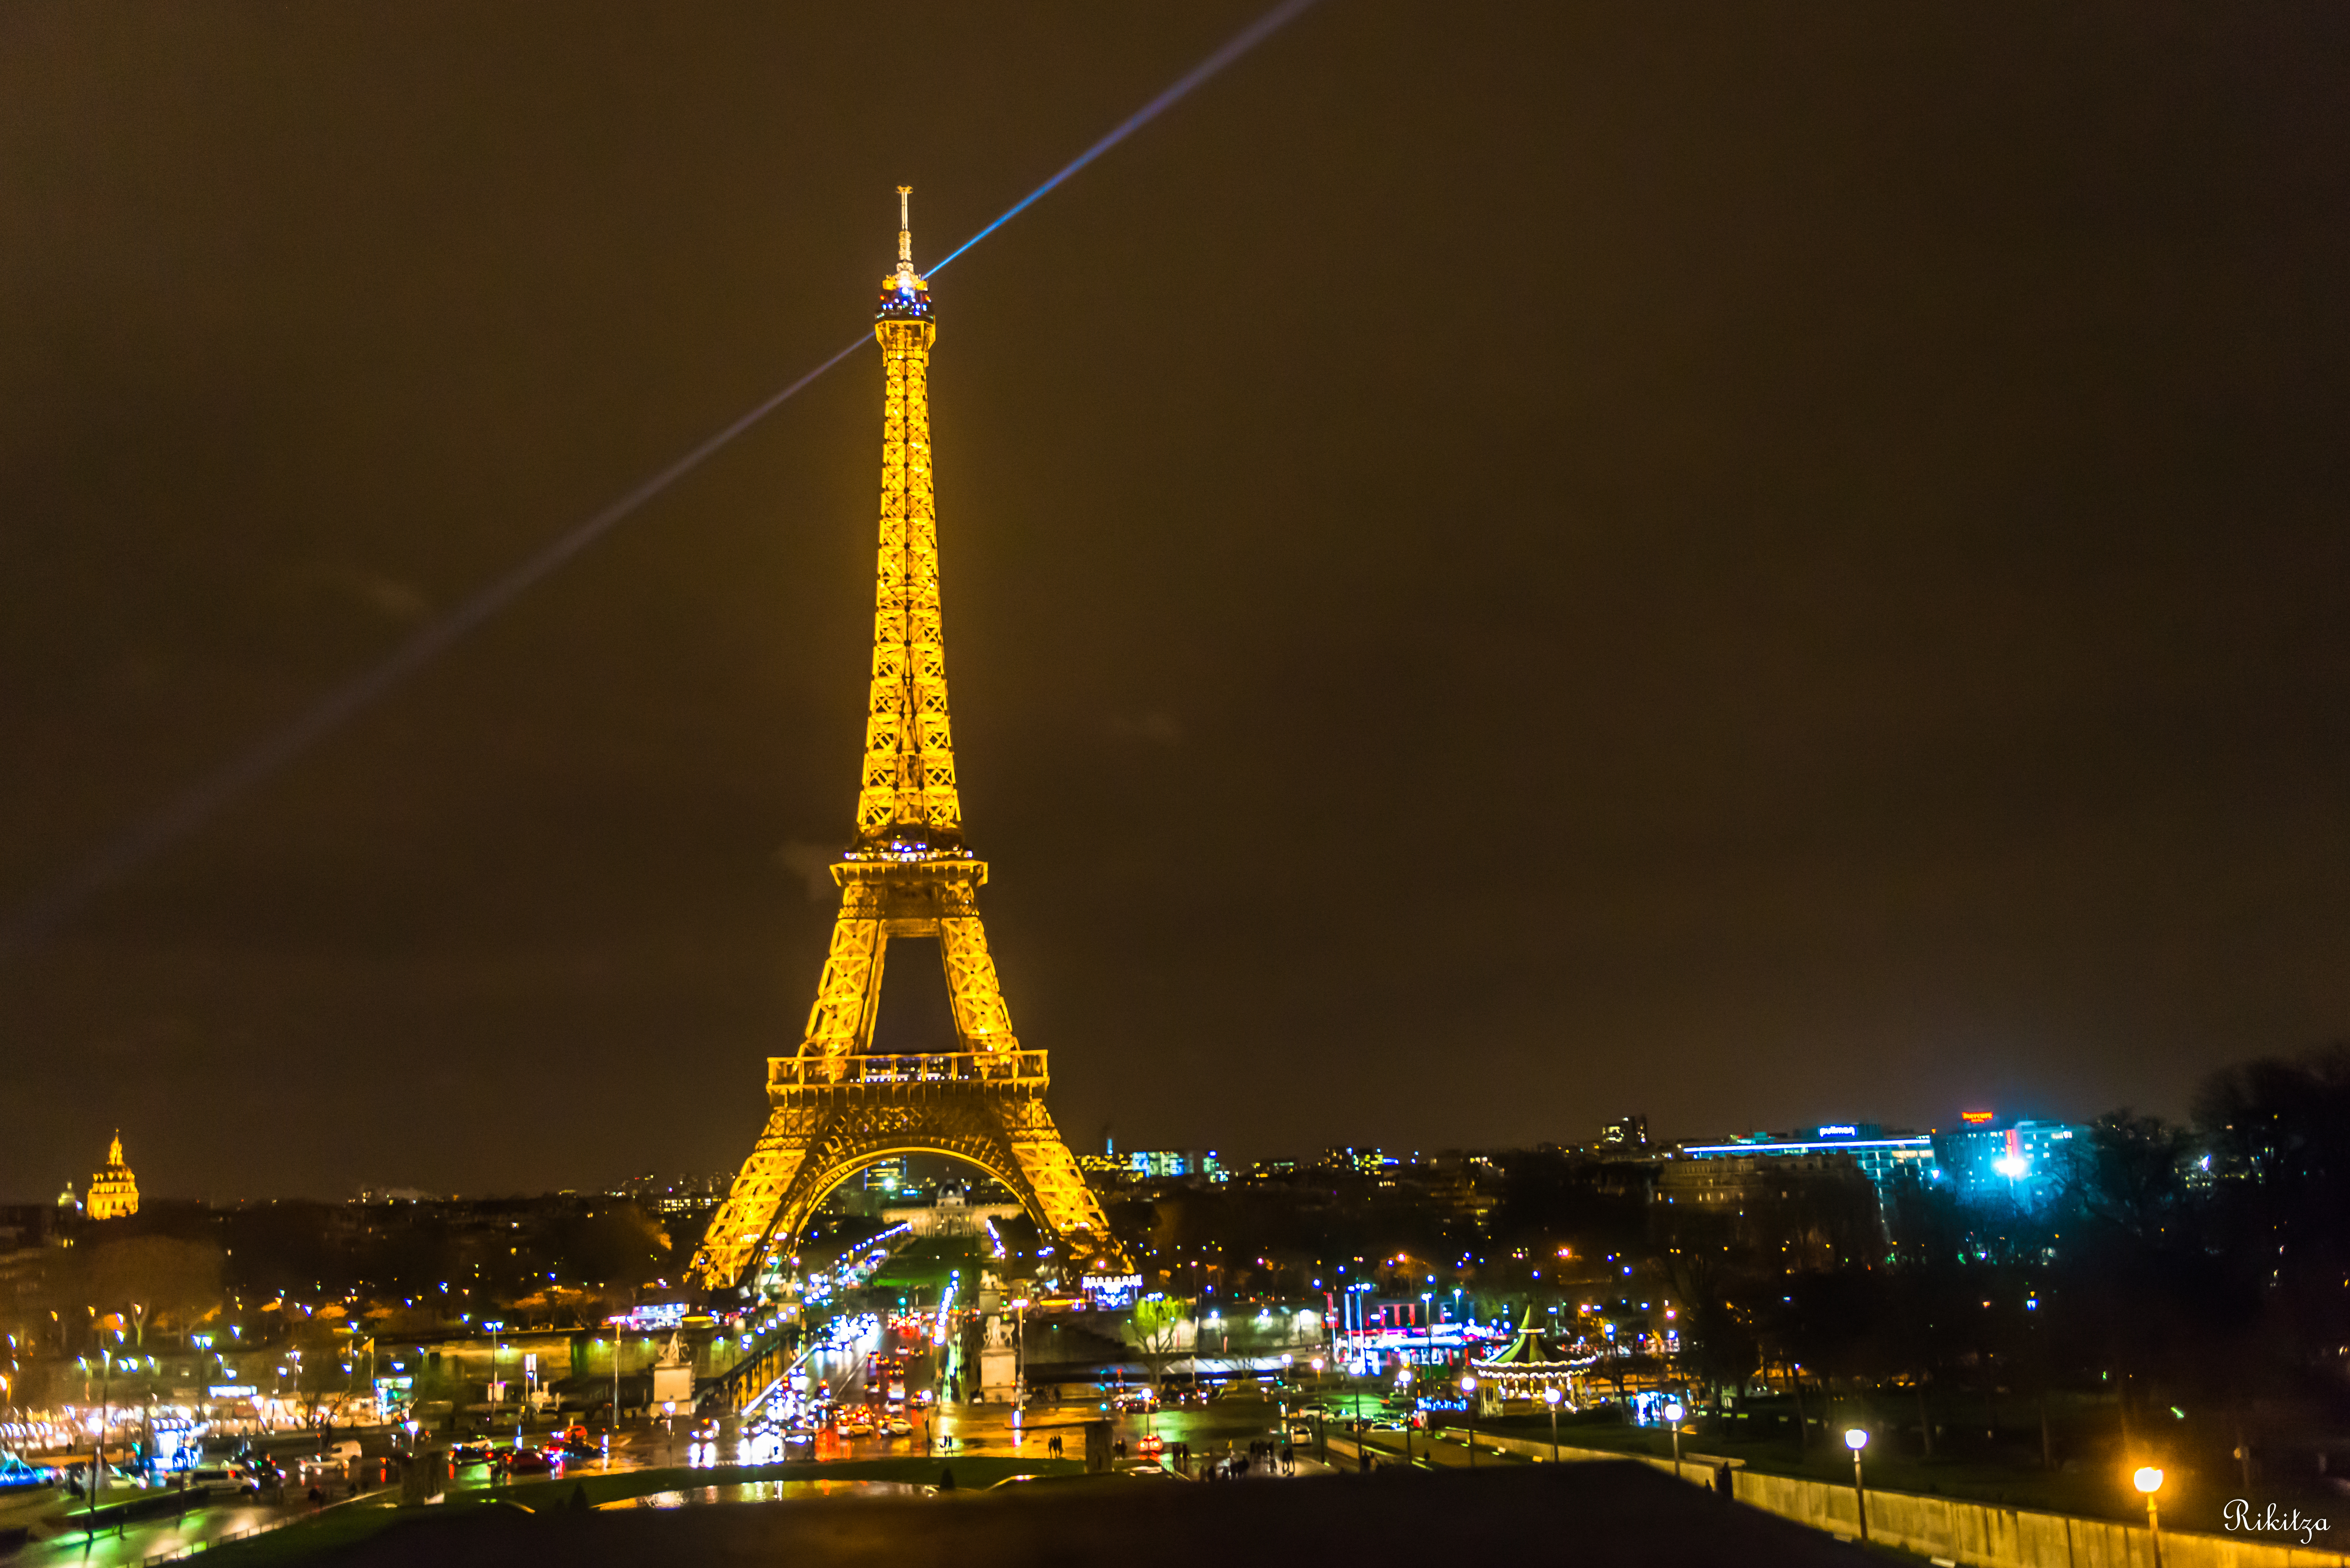 Paris the city of lights - rain and night all over by Rikitza on ...